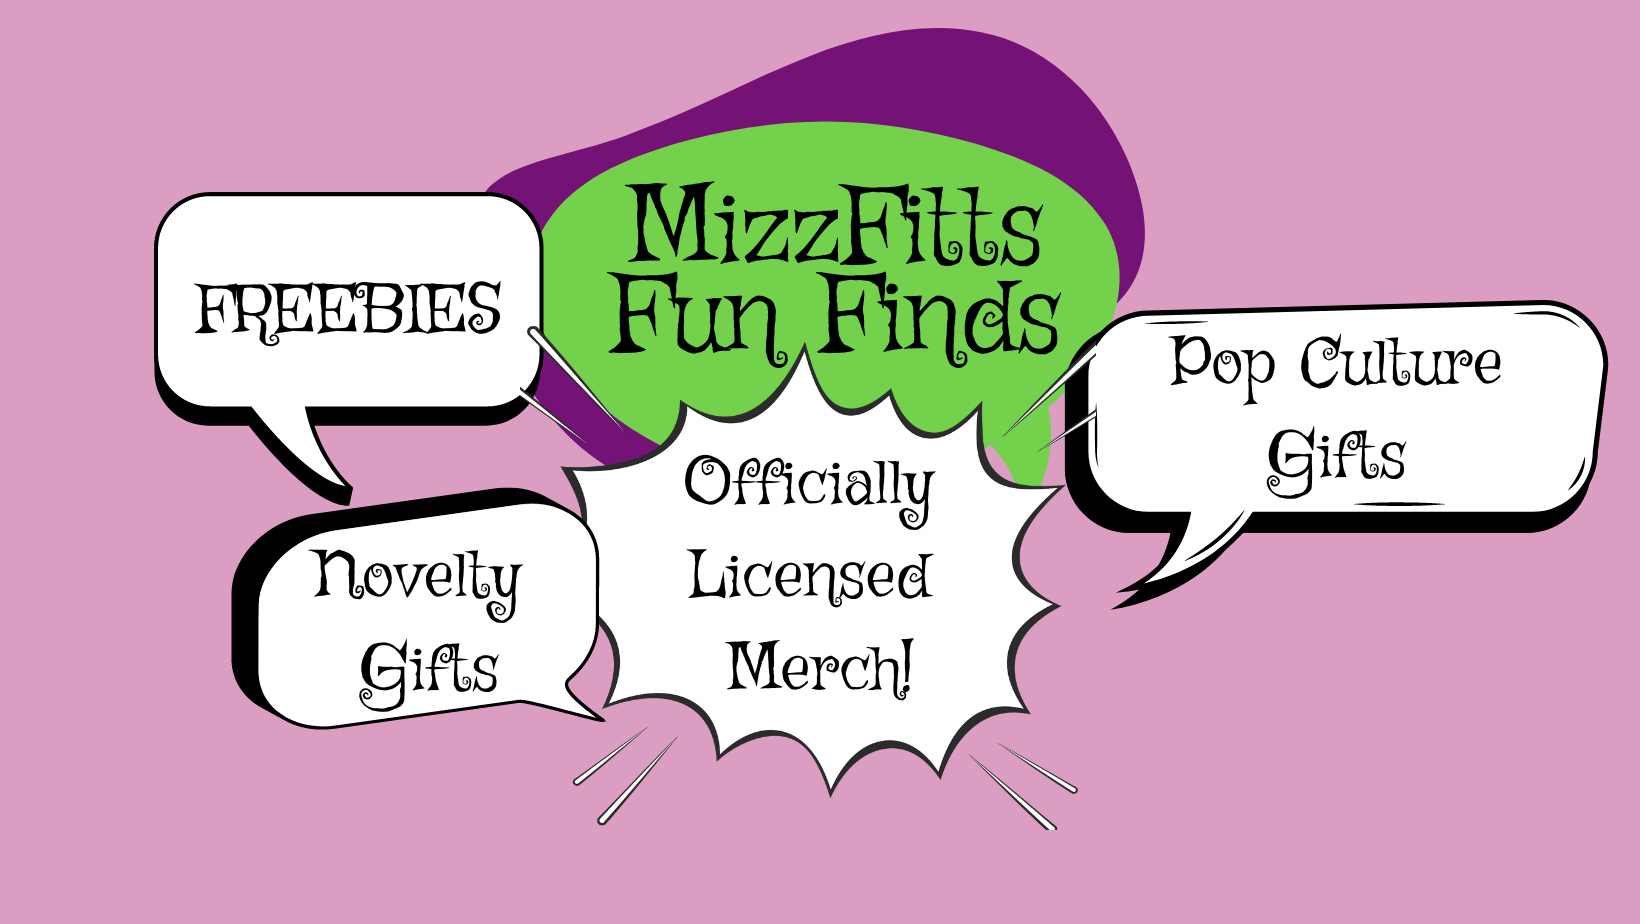 Load video: MizzFitts Fun Finds is an online collectible gift and novelty store that gives you more than what you pay for.  Each collection is inspired by family favorites. Enjoy the video!